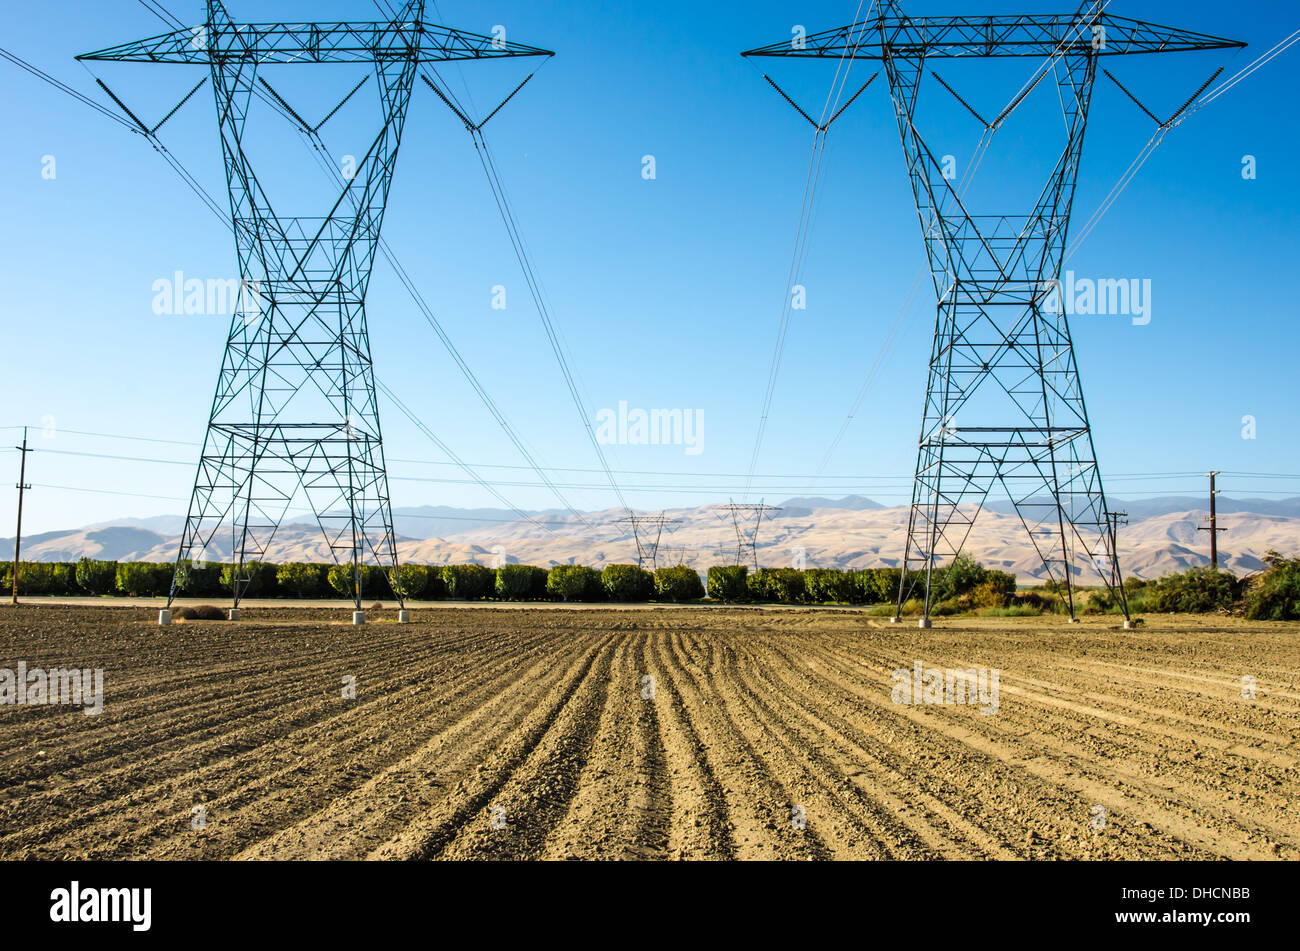 Electrical transmission towers in a field. Central California, United States. Stock Photo